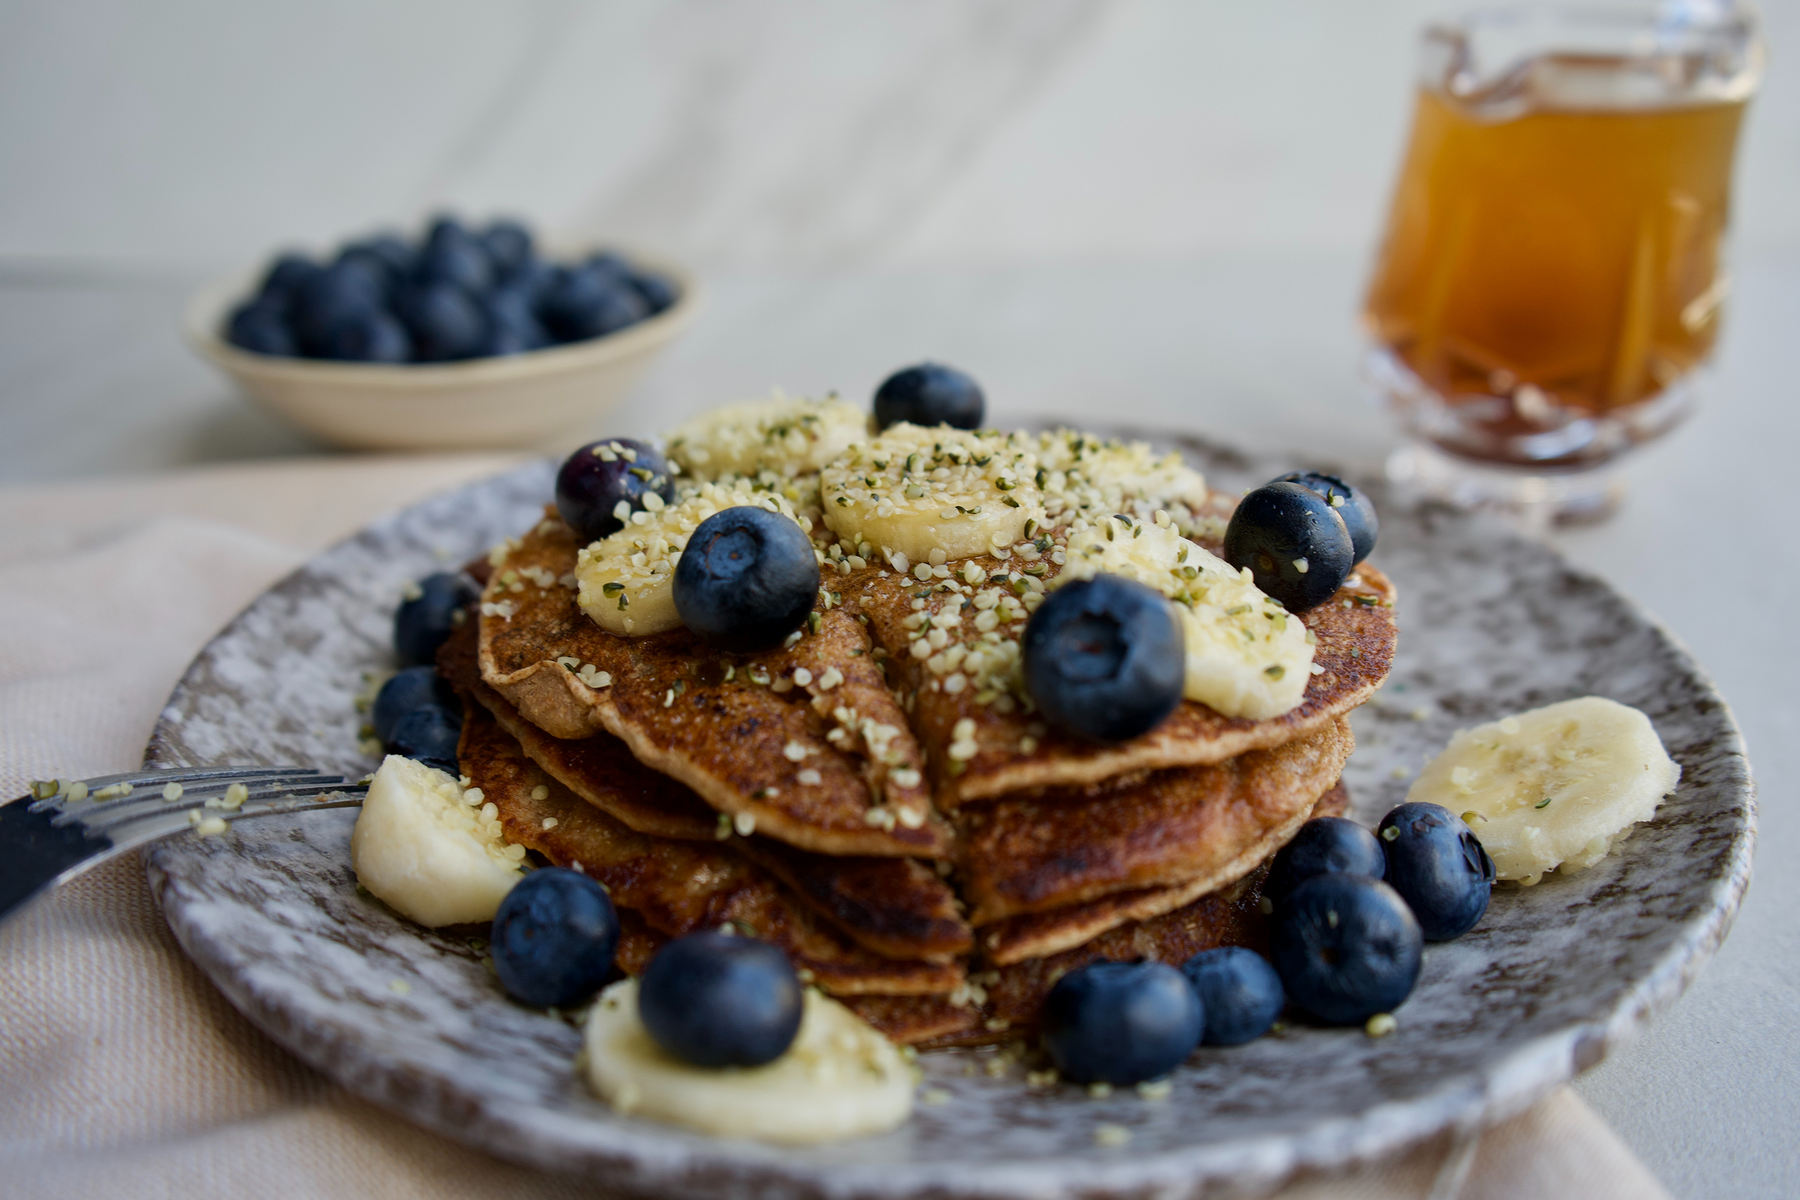 Plant based pancakes don't have to be plain!